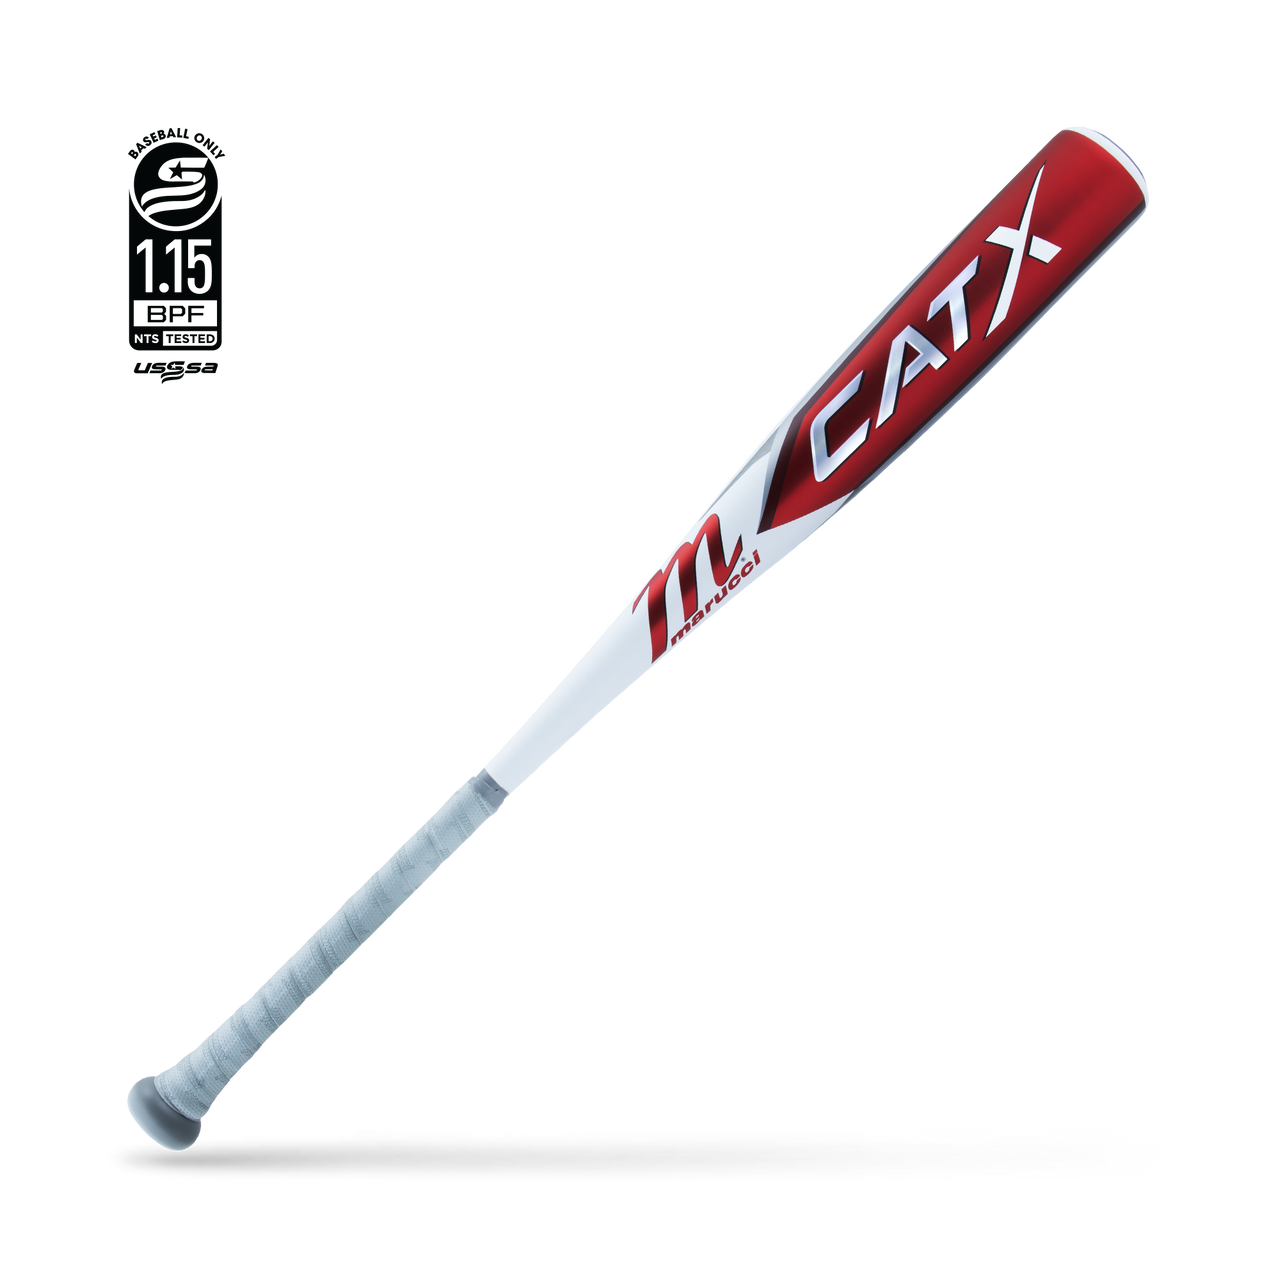 marucci-cat-x-5-usssa-baseball-bat-32-inch-27-oz MSBCX5-3227 Marucci  <p><span style=font-size large;>The CATX Senior League -5 bat is engineered for